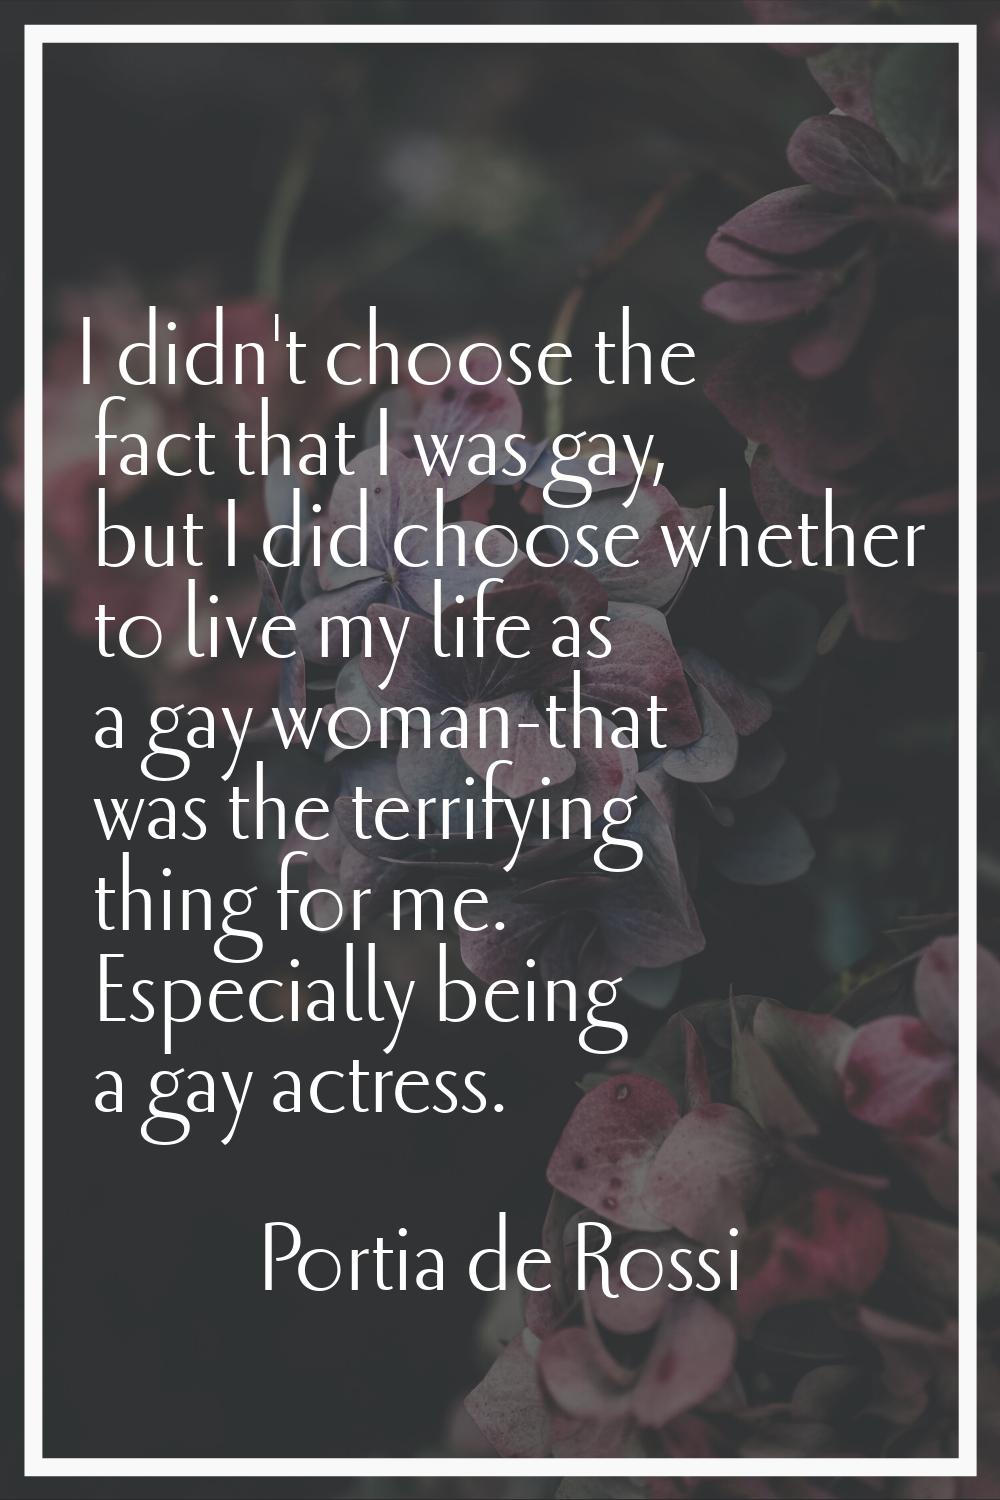 I didn't choose the fact that I was gay, but I did choose whether to live my life as a gay woman-th